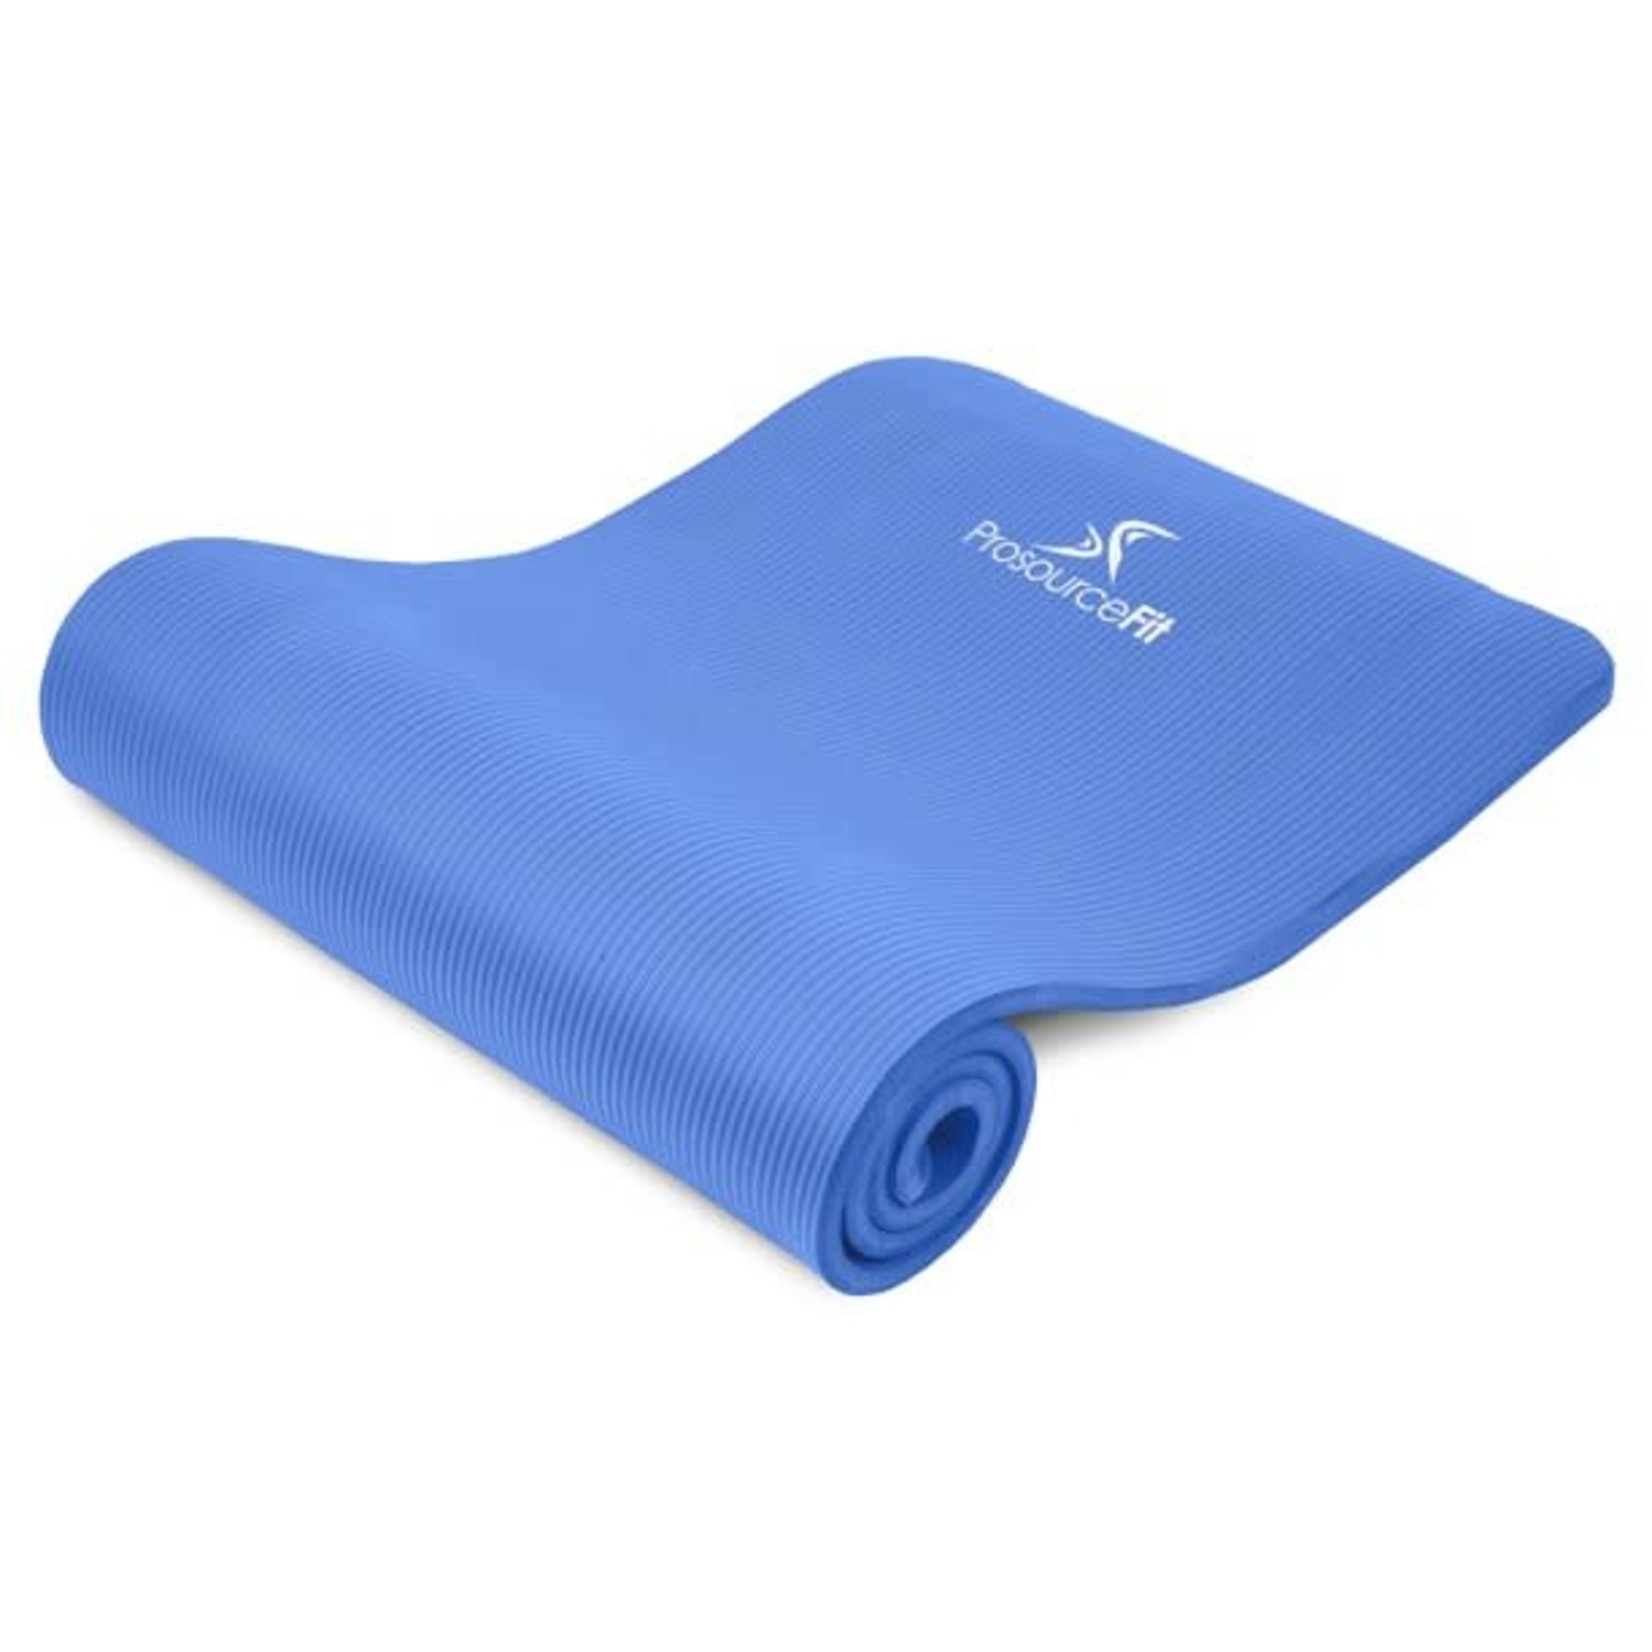 Prosourcefit Extra Thick Yoga and Pilates Mat 1/2 In., Blue